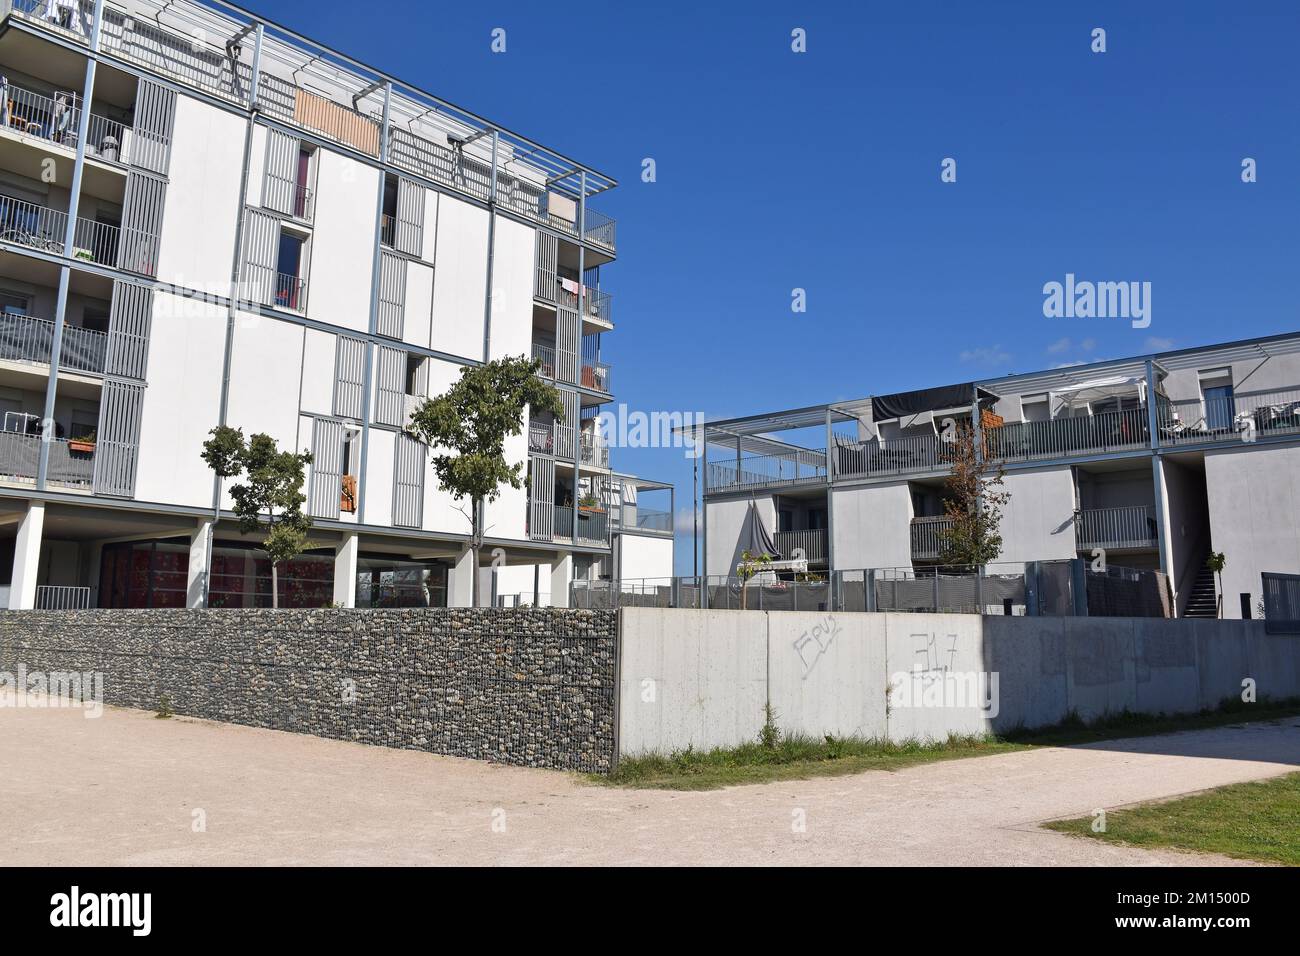 Attractive, airy, three and six-storey, apartment buildings, overlooking former farmland, Parc, ZAC Andromède, Blagnac, Toulouse, France, Stock Photo